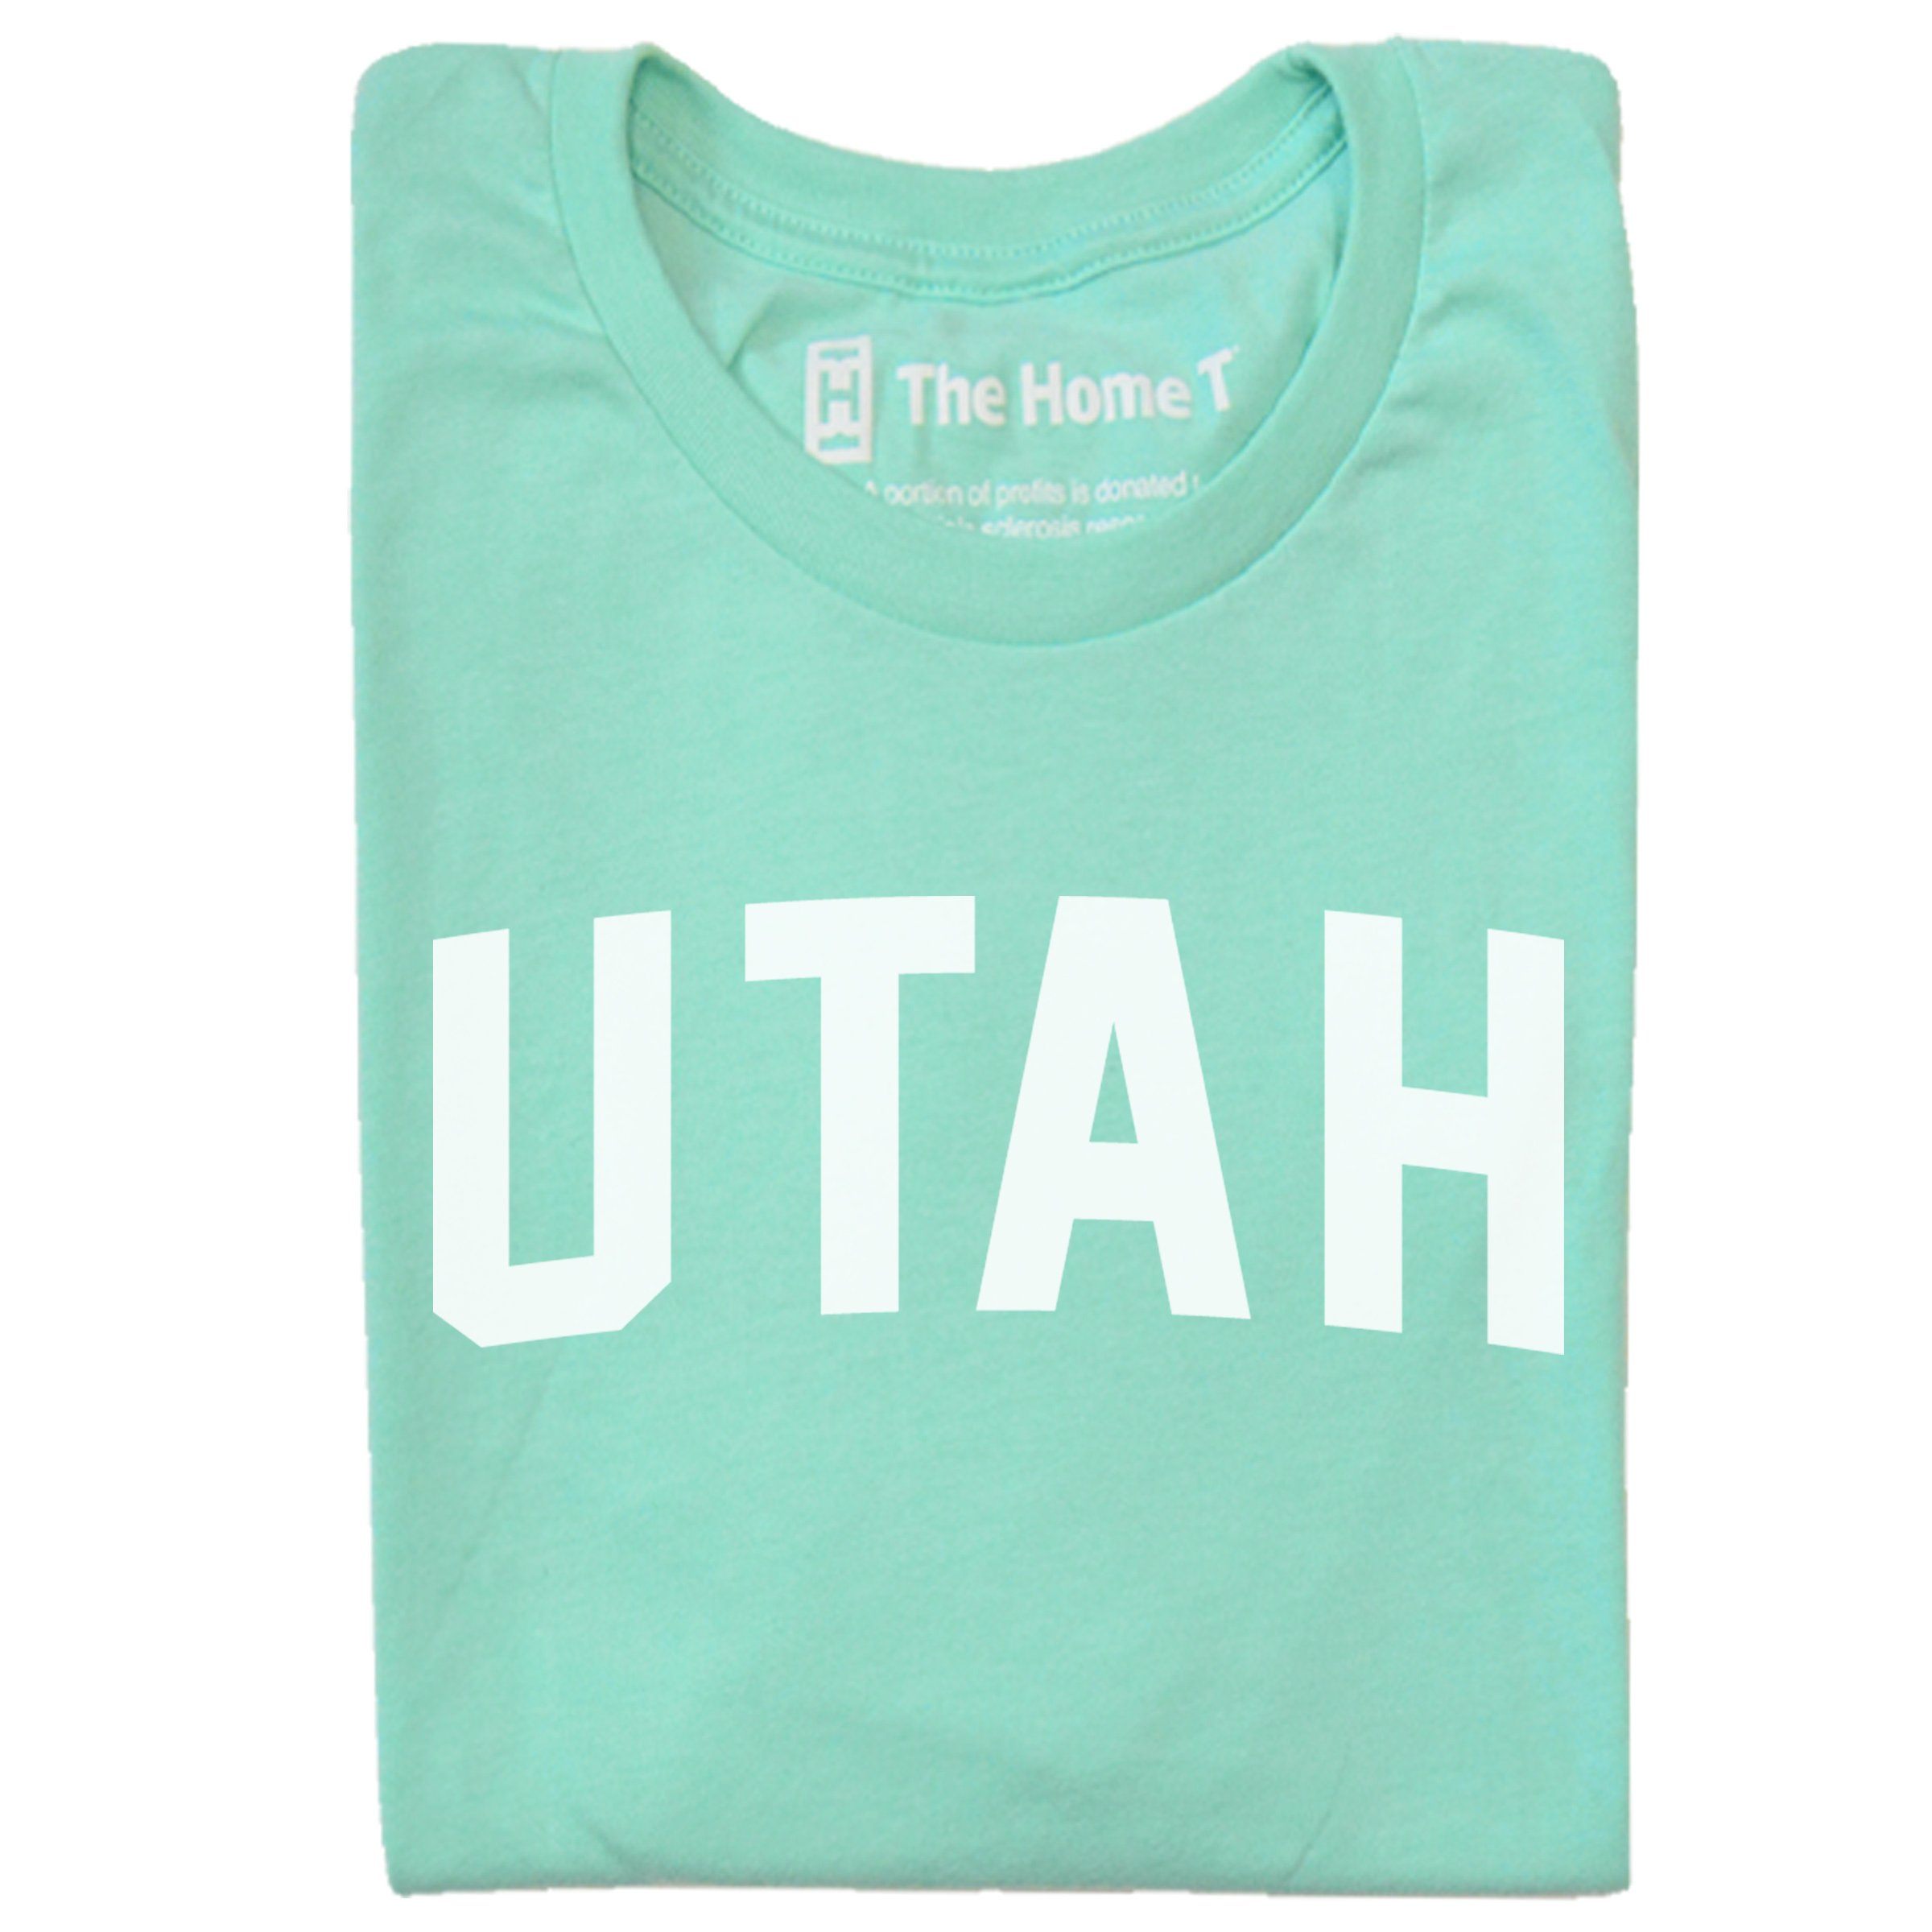 Utah Arched The Home T XS Mint